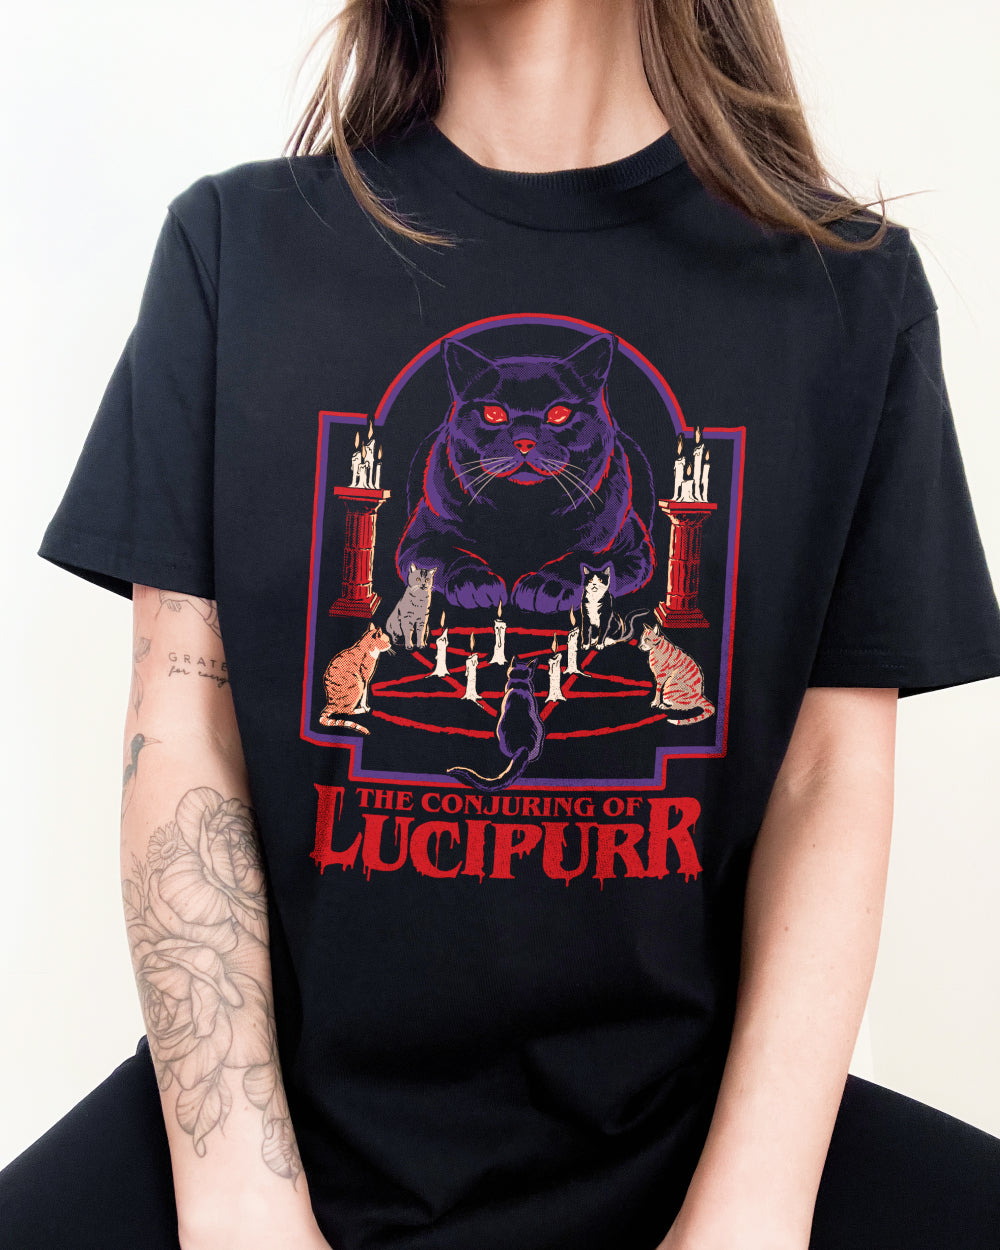 The Conjuring of Lucipurr T-Shirt Europe Online